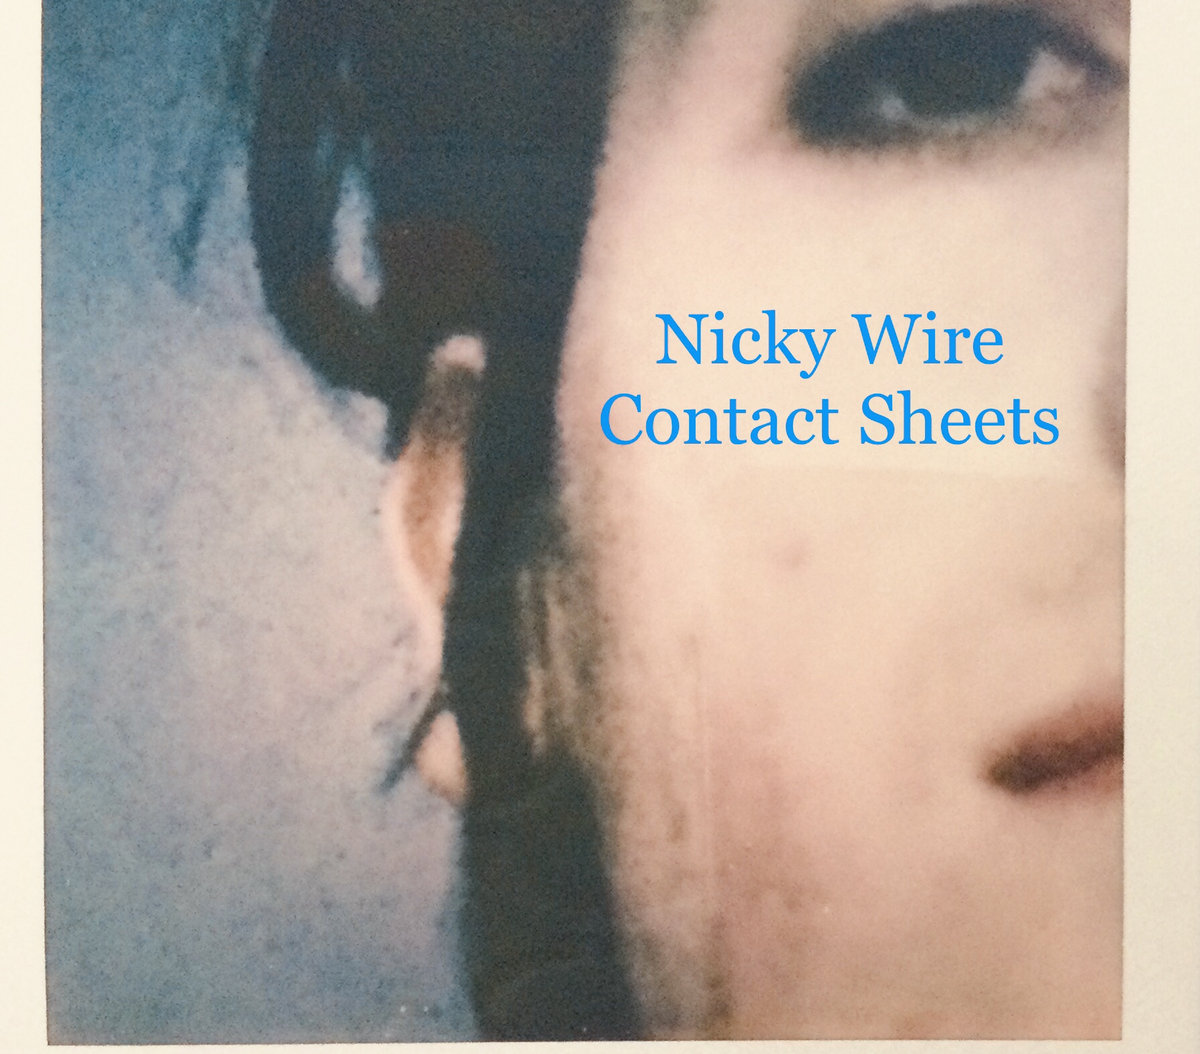 News – Nicky Wire – Contact Sheets